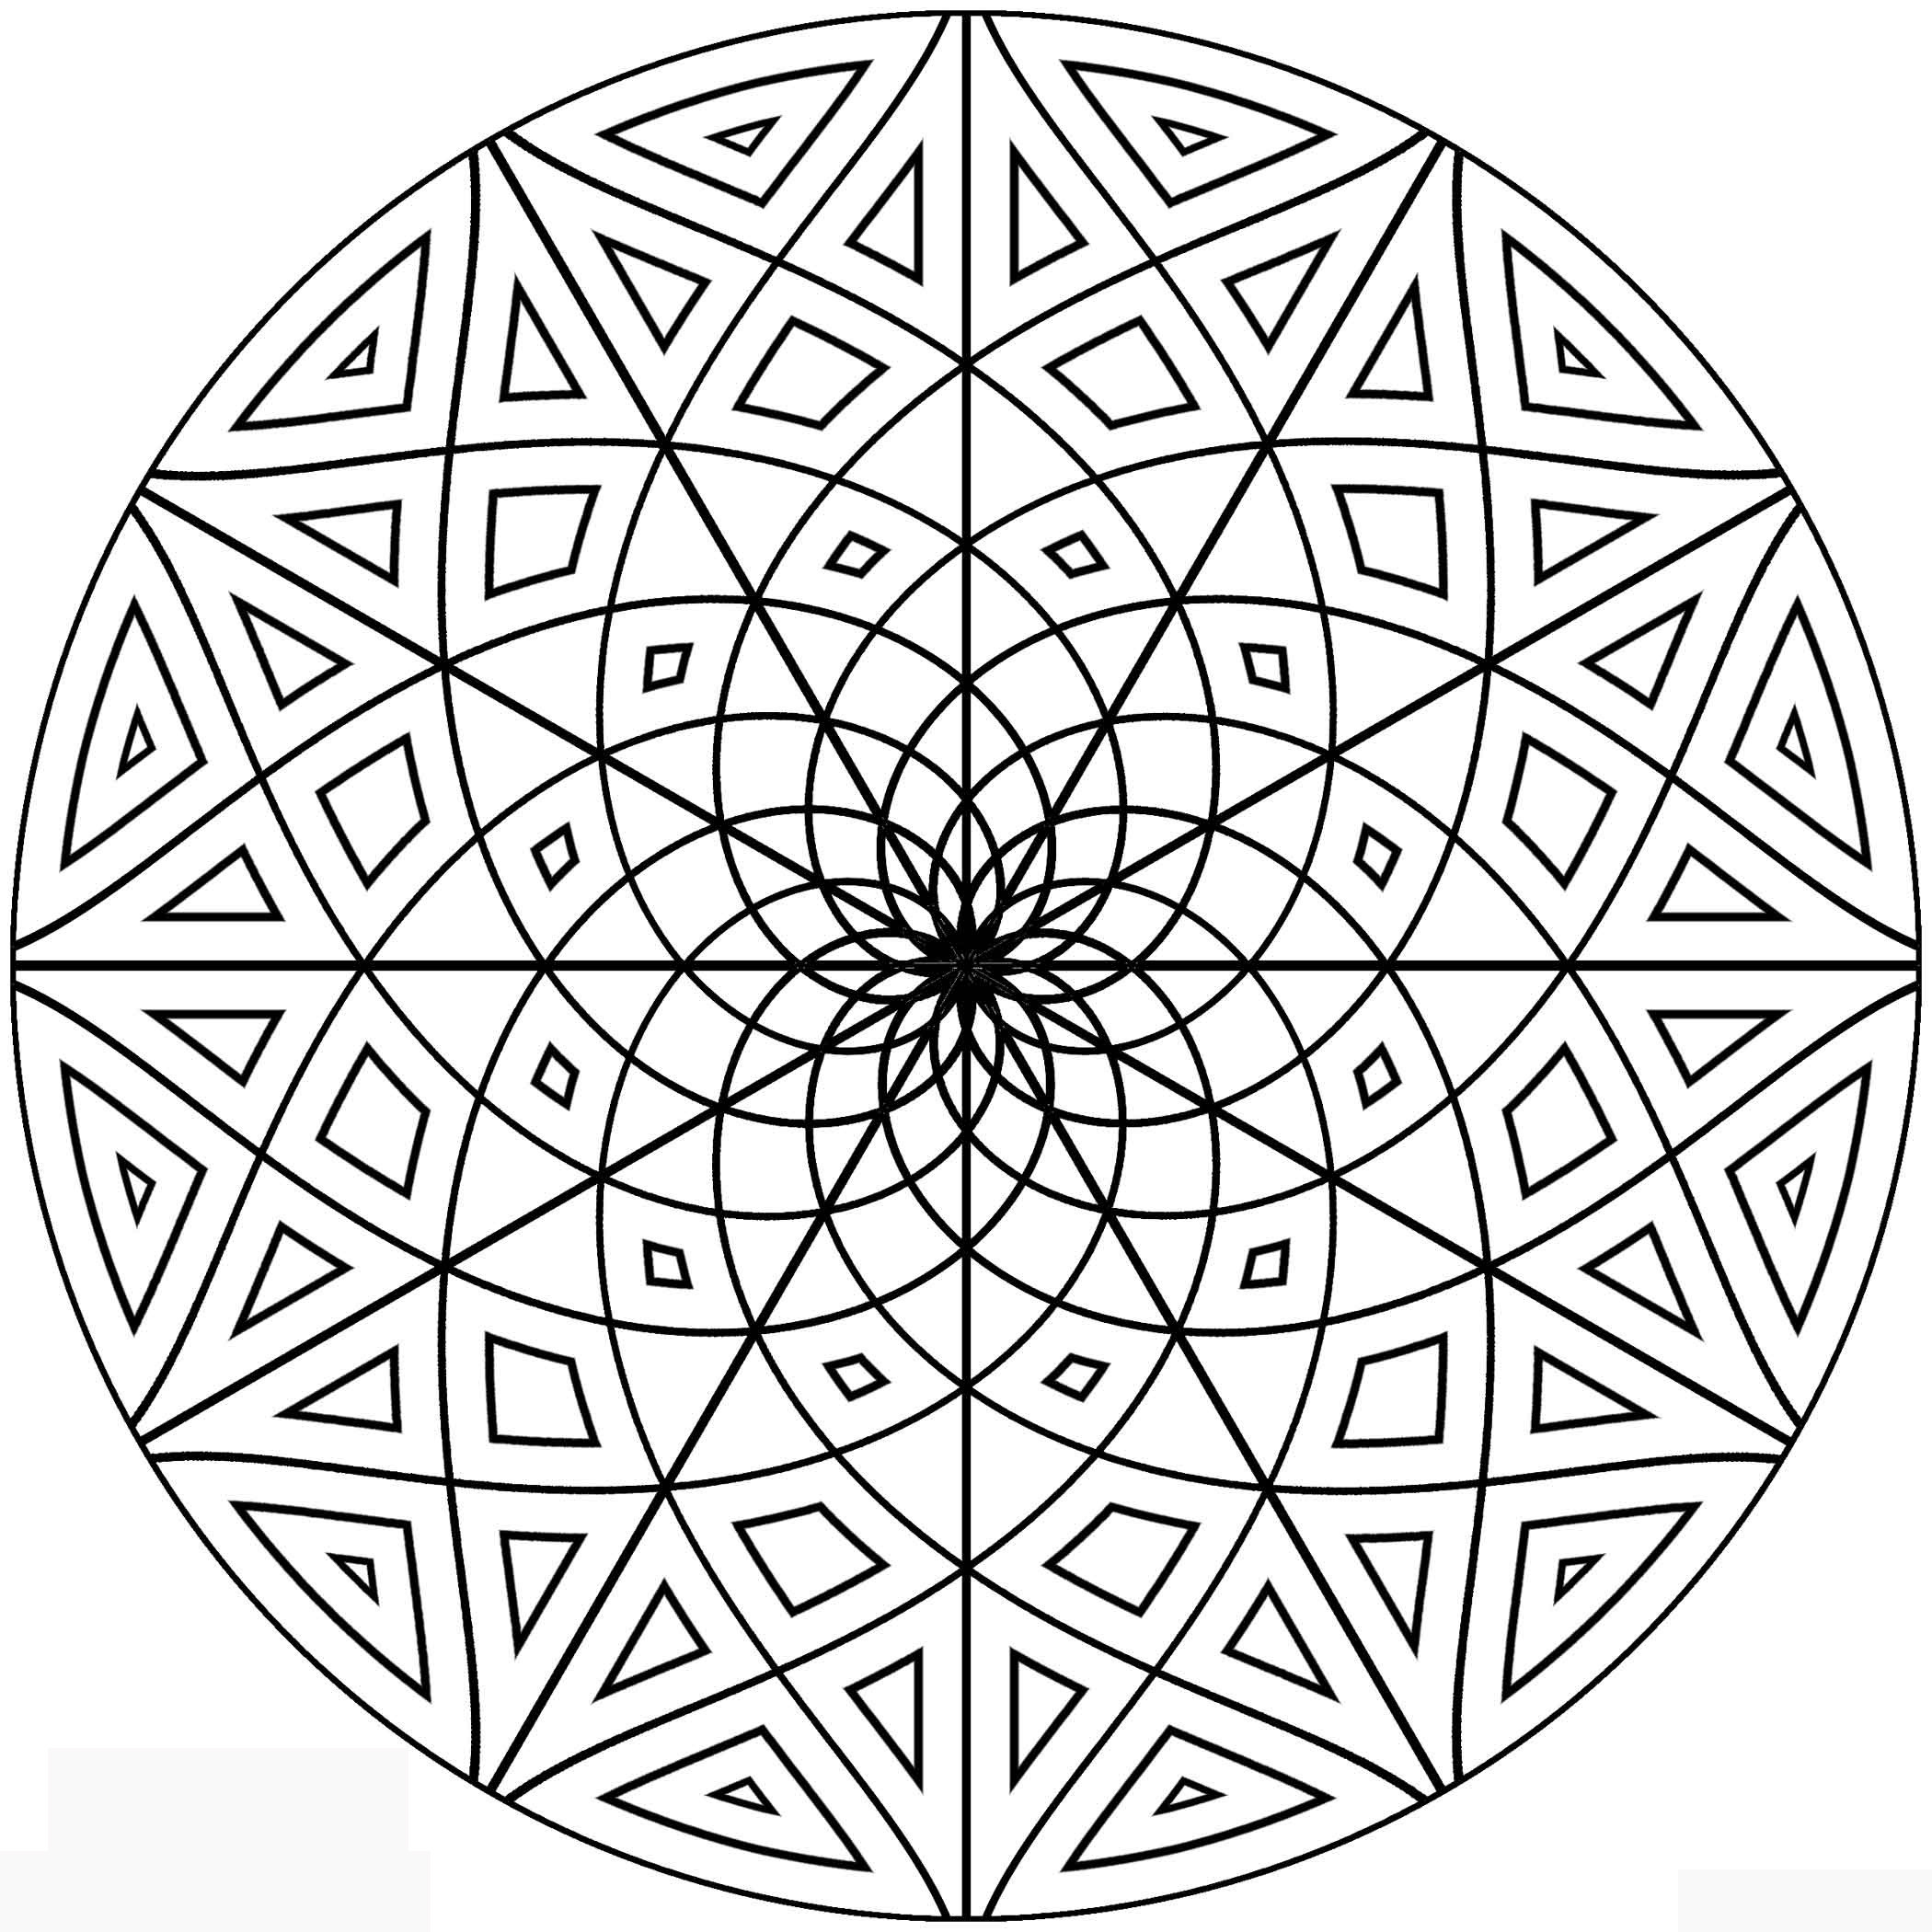 Printable Kaleidoscope Coloring Pages For Teens
 Free Printable Geometric Coloring Pages for Adults